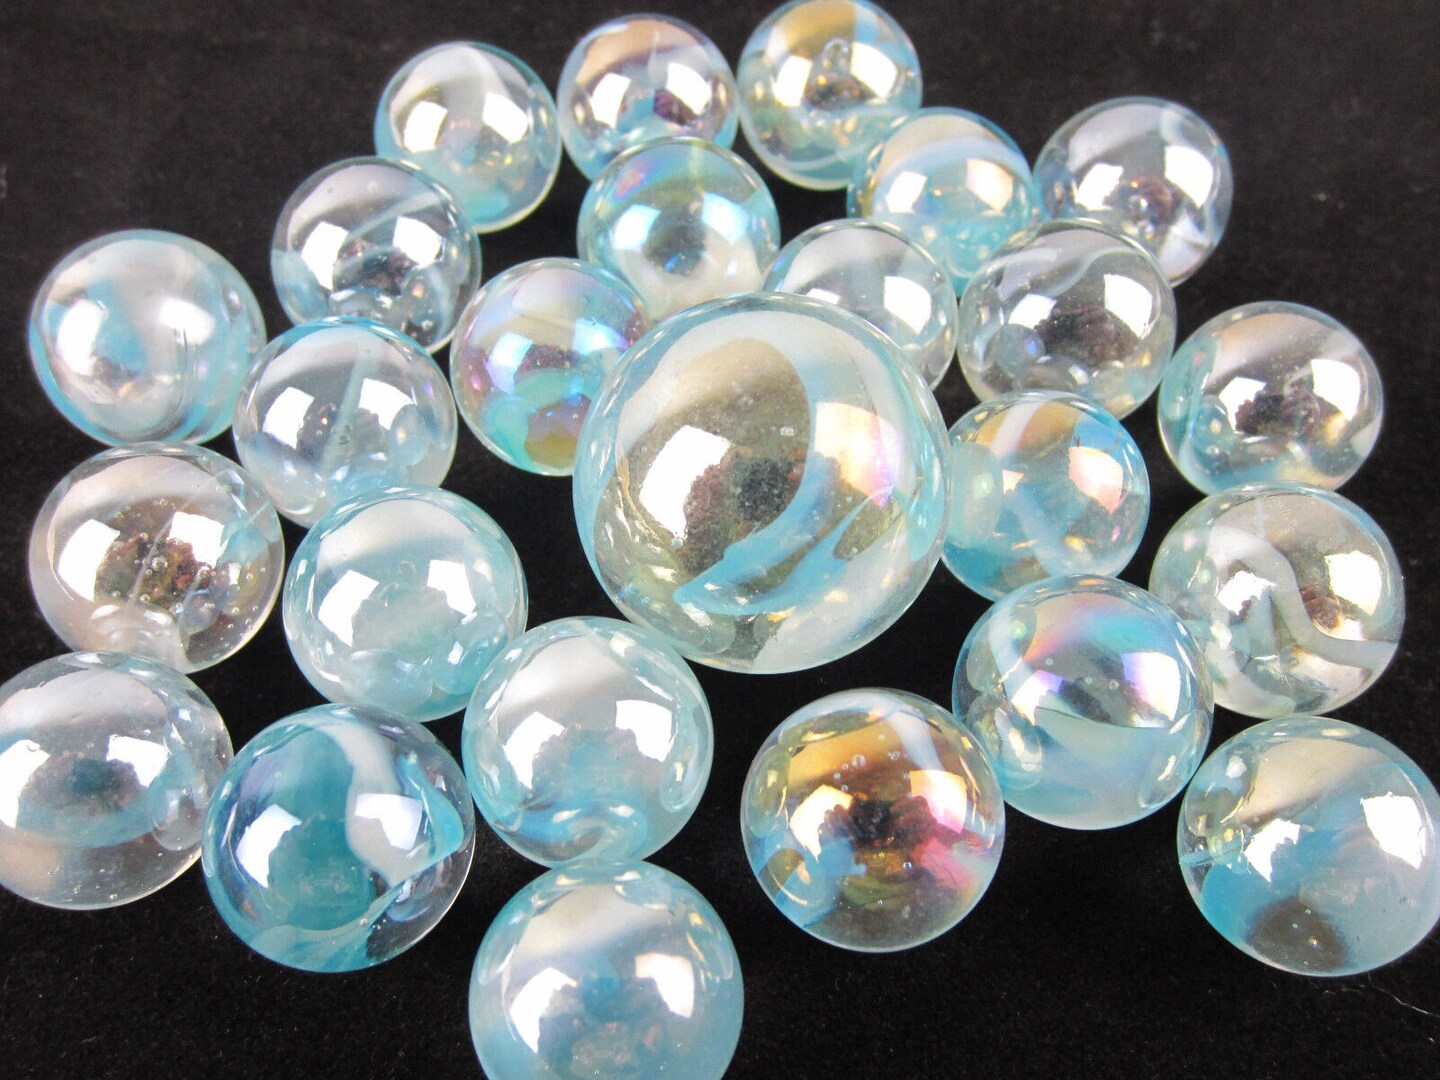 25 Glass Marbles ICE QUEEN Blue/White Clear Iridescent game pack Shooter